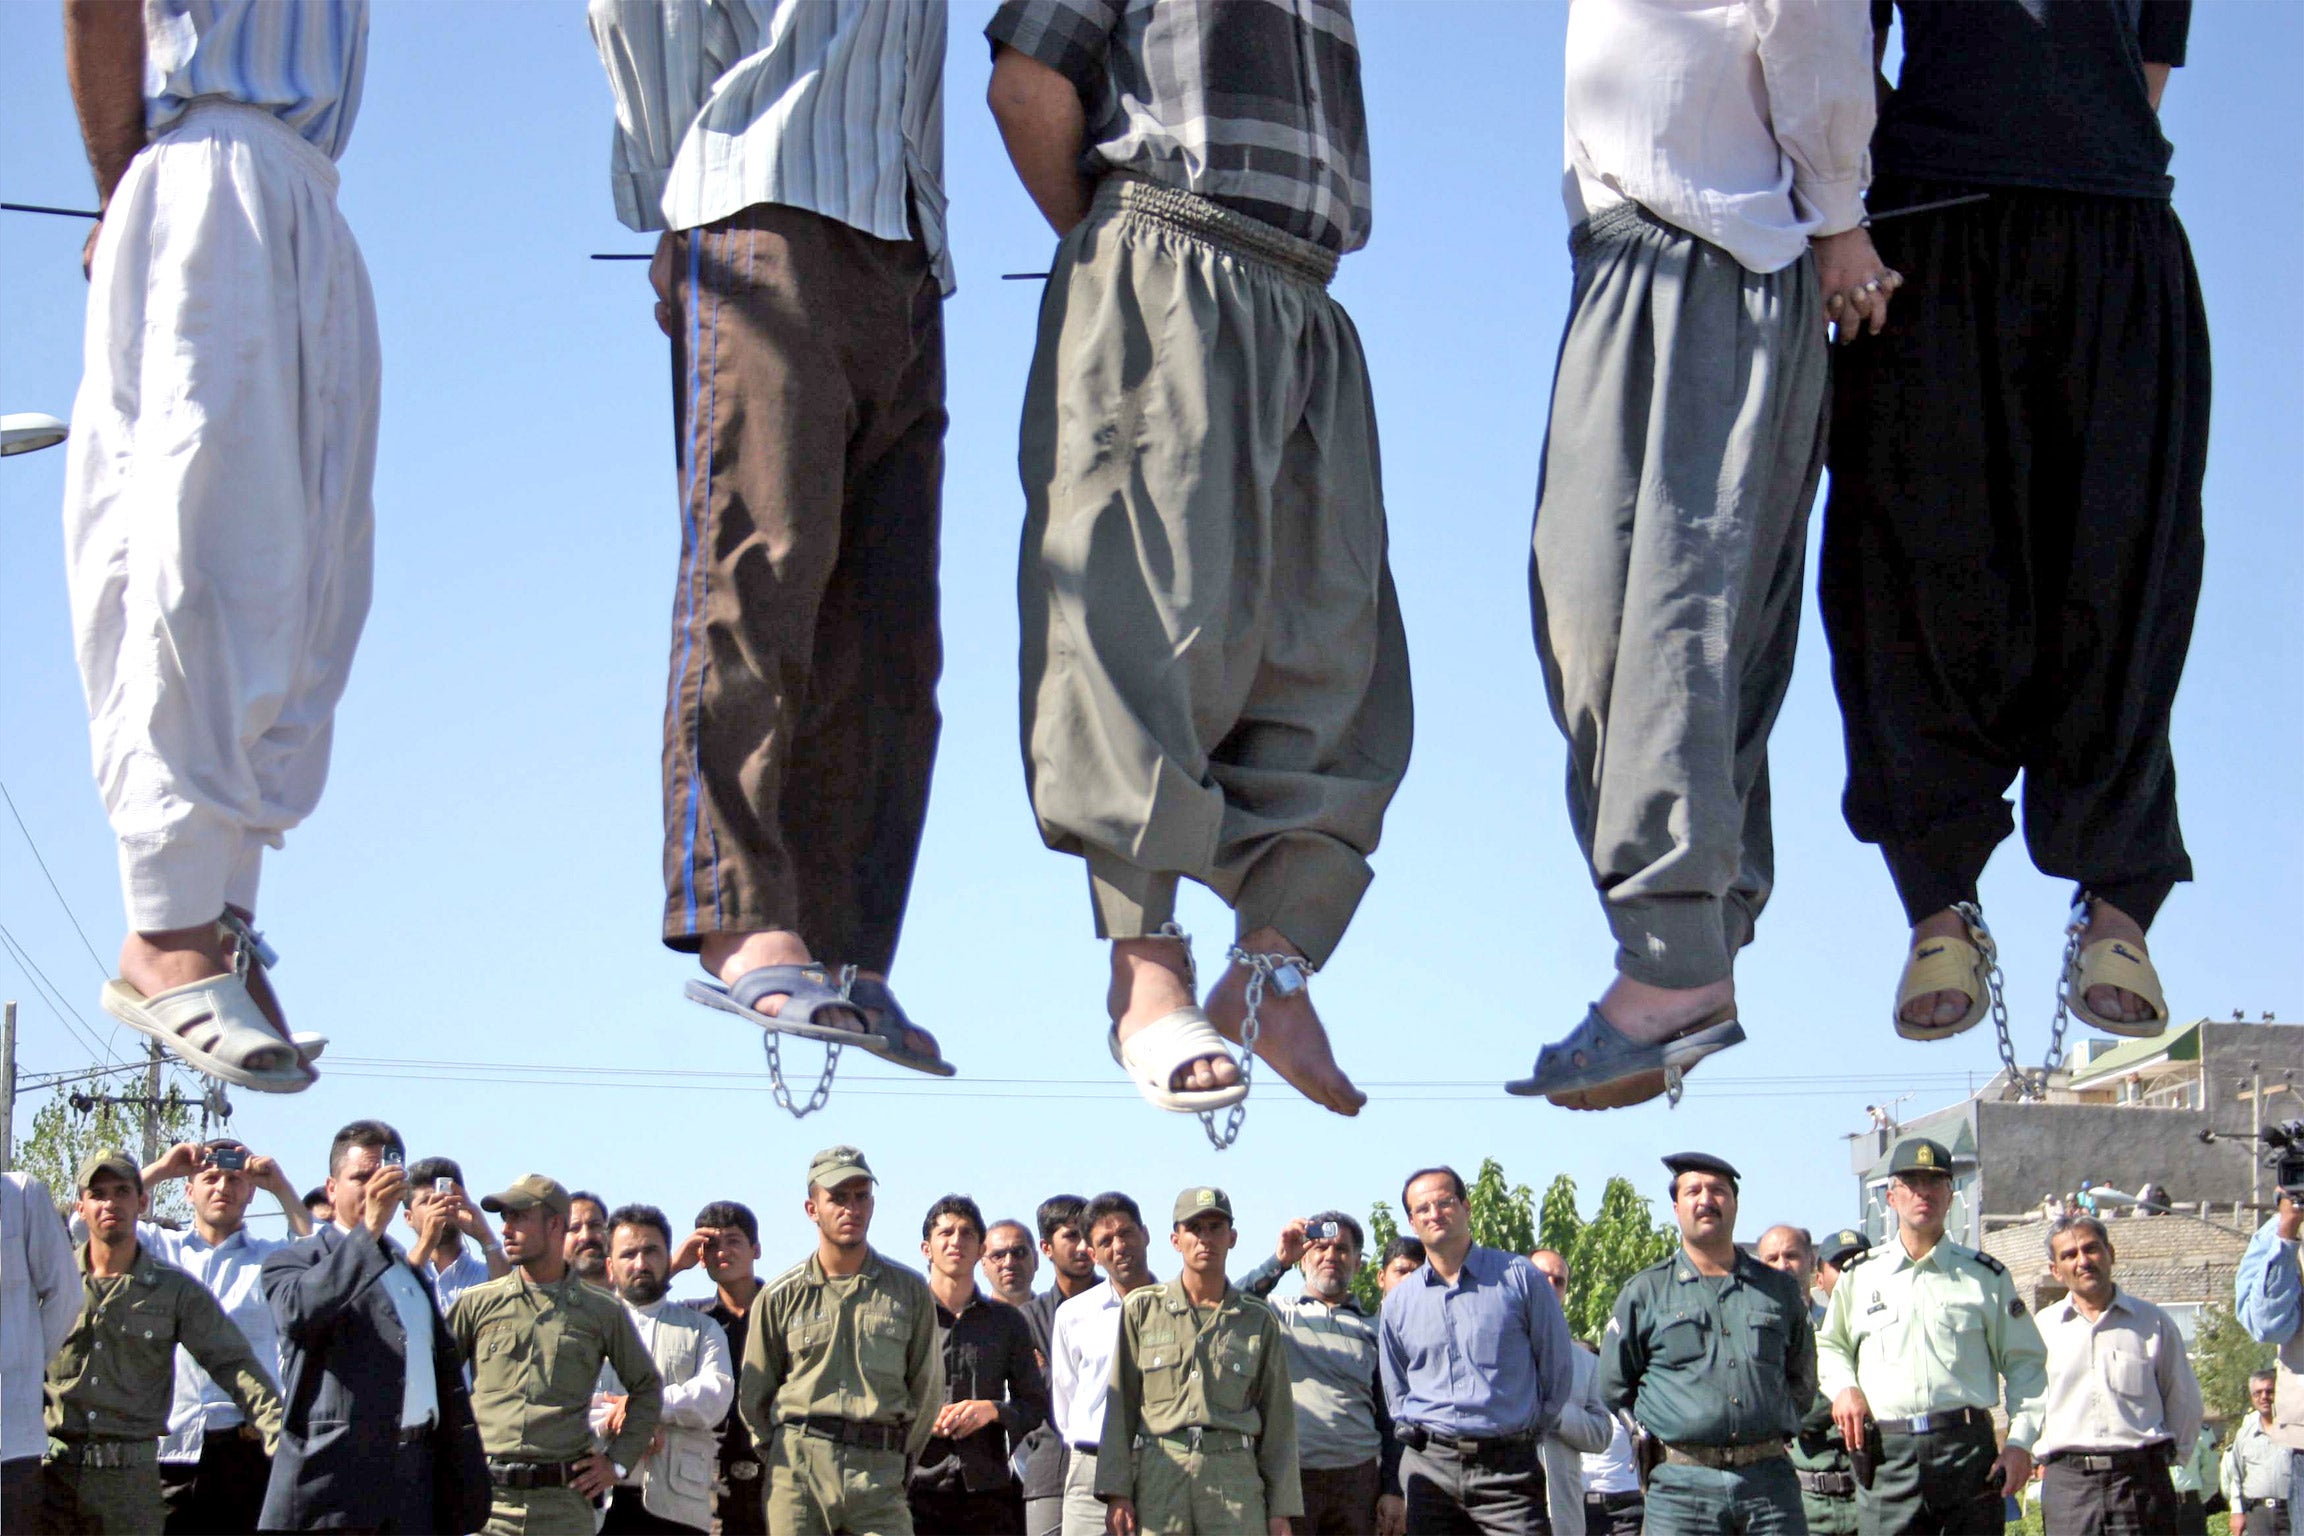 A public hanging north of Tehran, highlighting the lack of change in the Iranian government's approach to capital punishment.